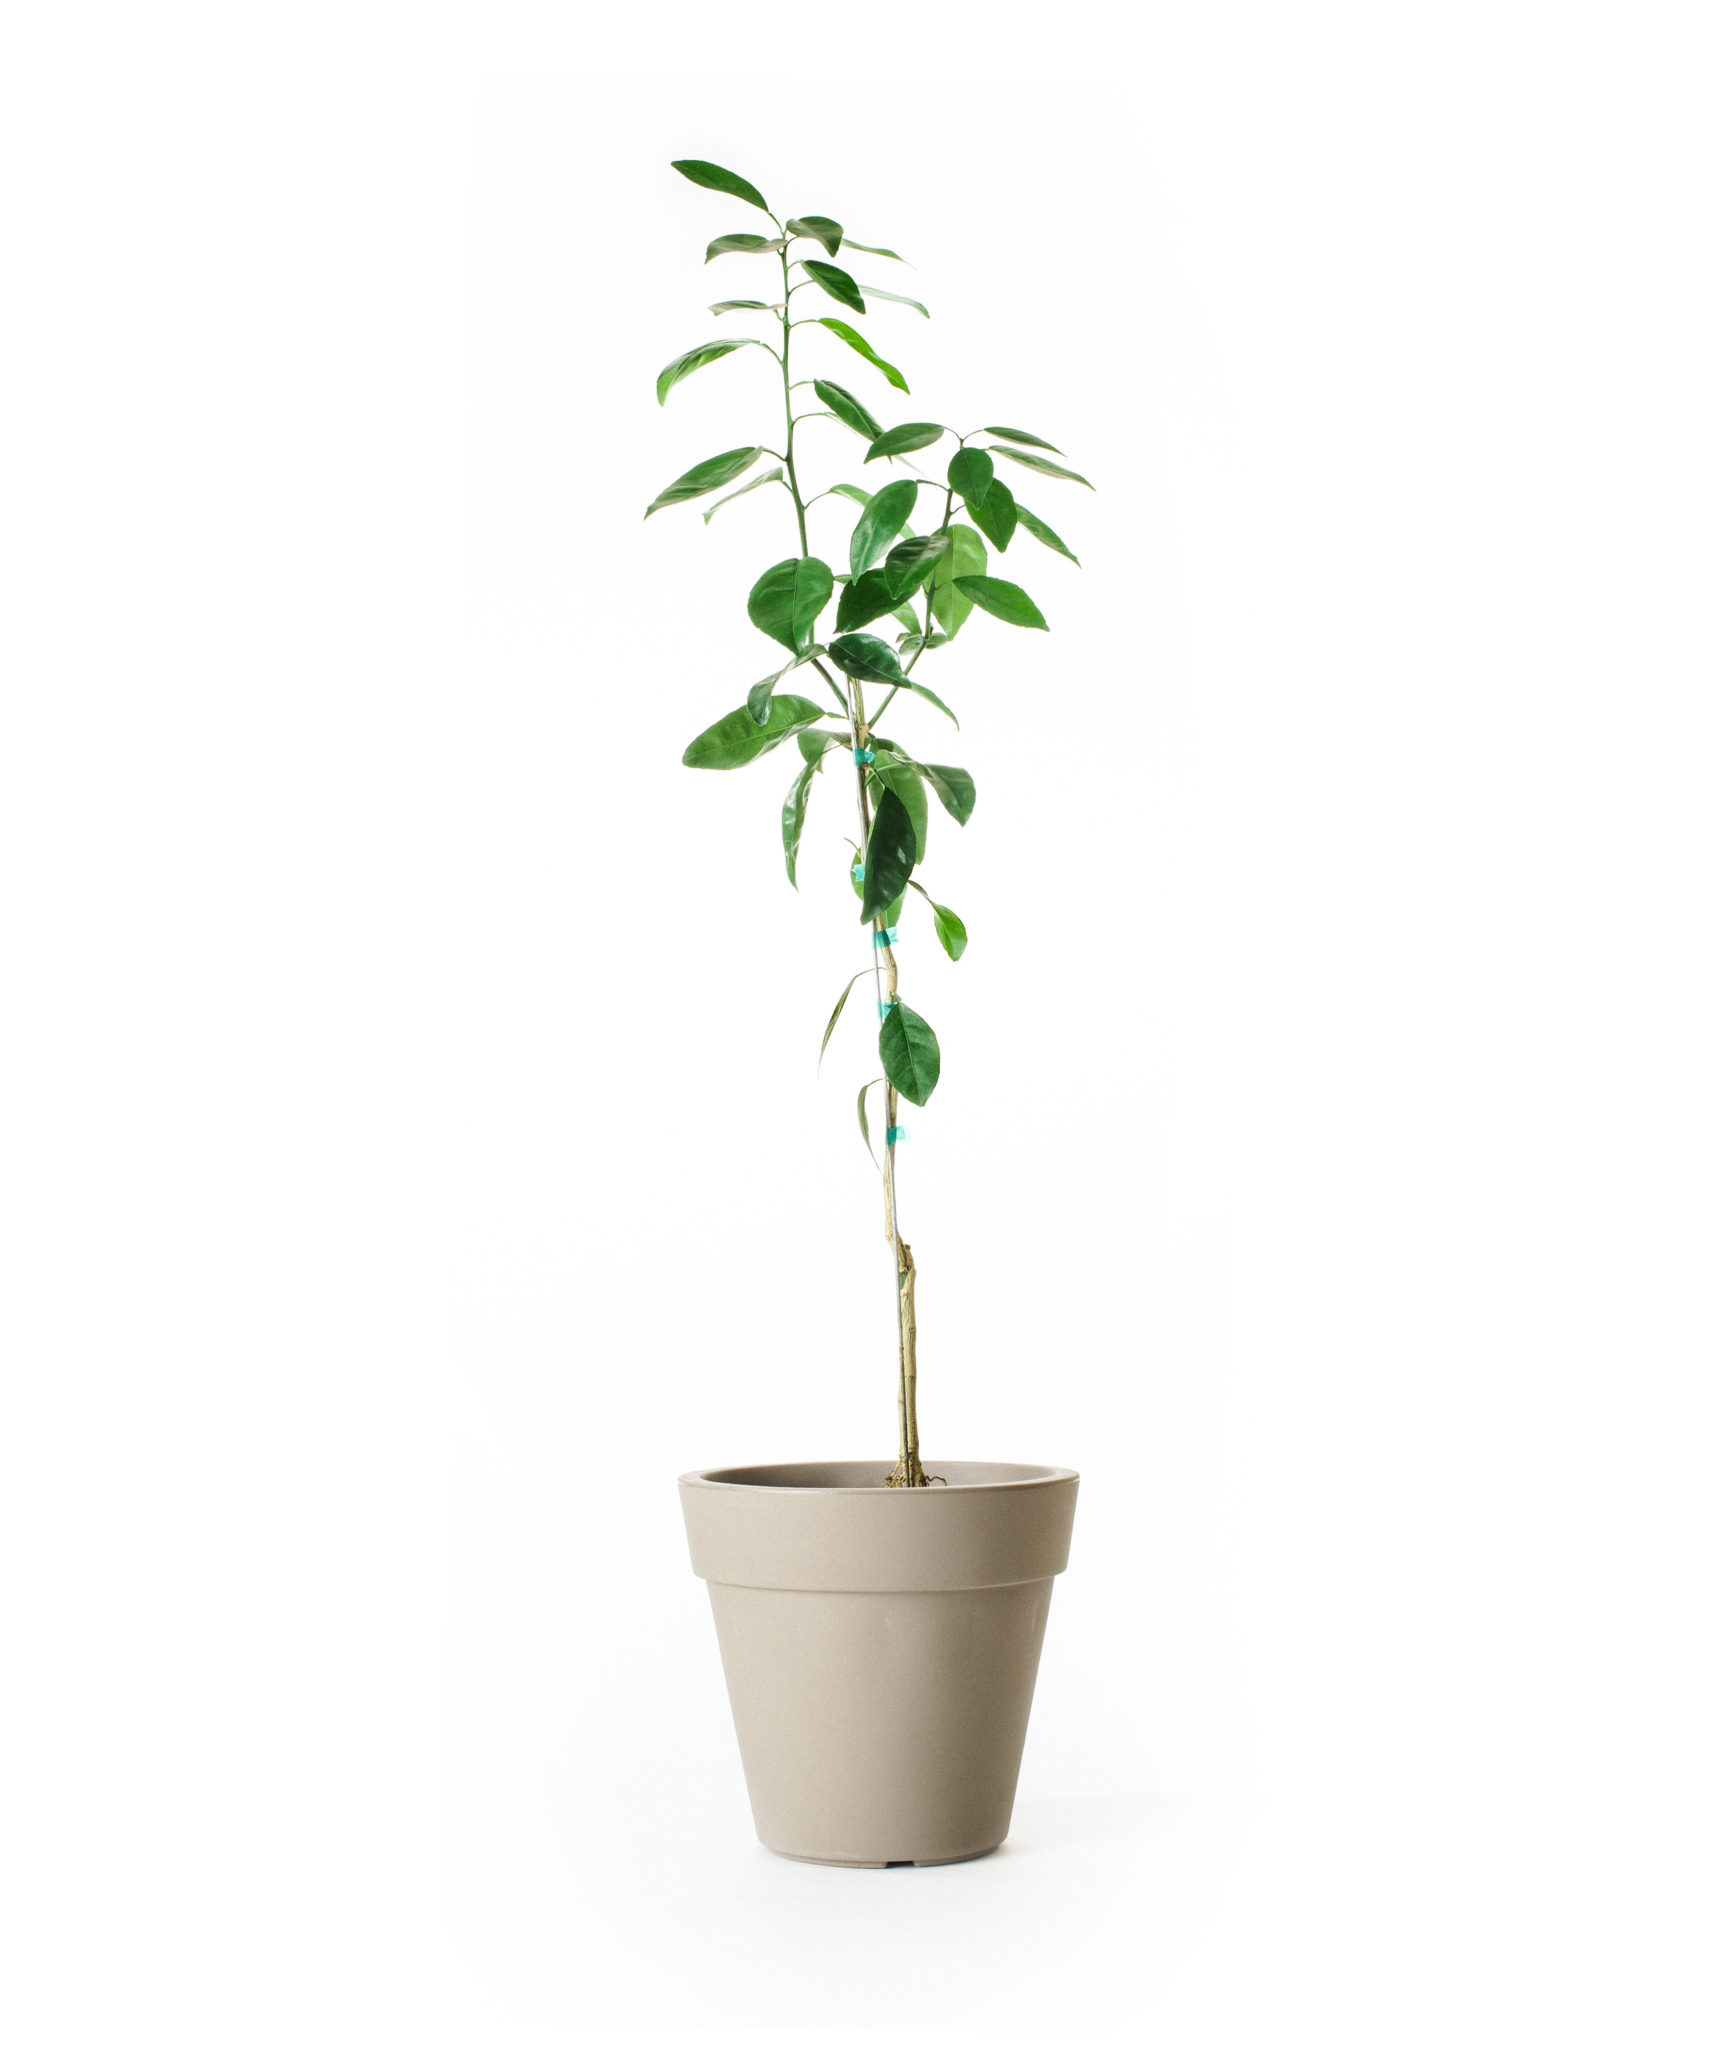 Image of Miho Satsuma Tree (Age: 4 - 5 Years Height: 3 - 4 FT Ship Method: Delivery)